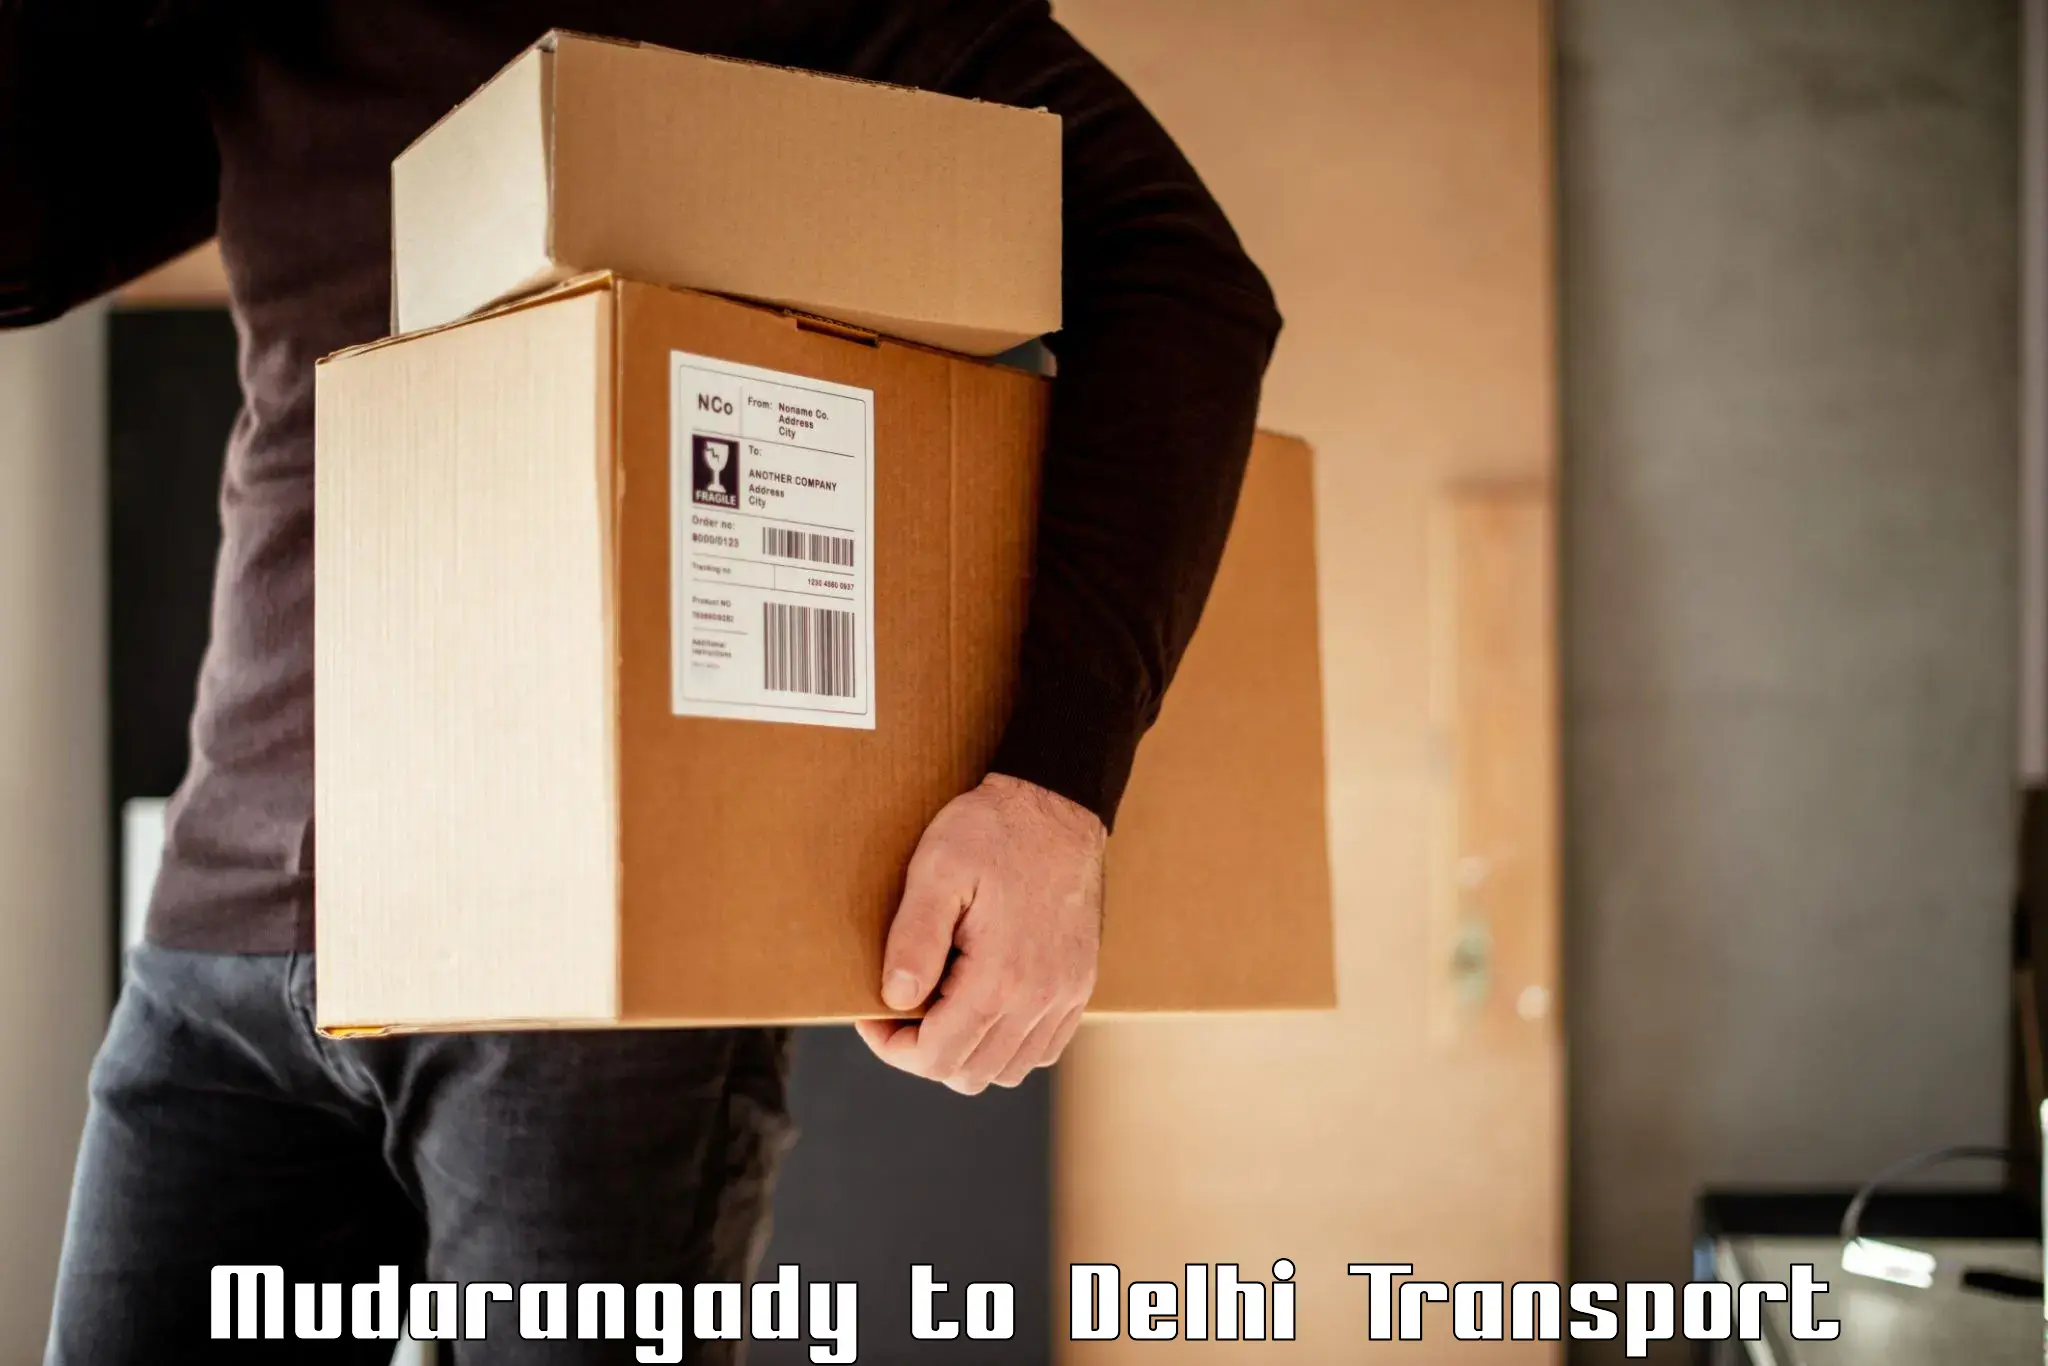 Air freight transport services in Mudarangady to Lodhi Road